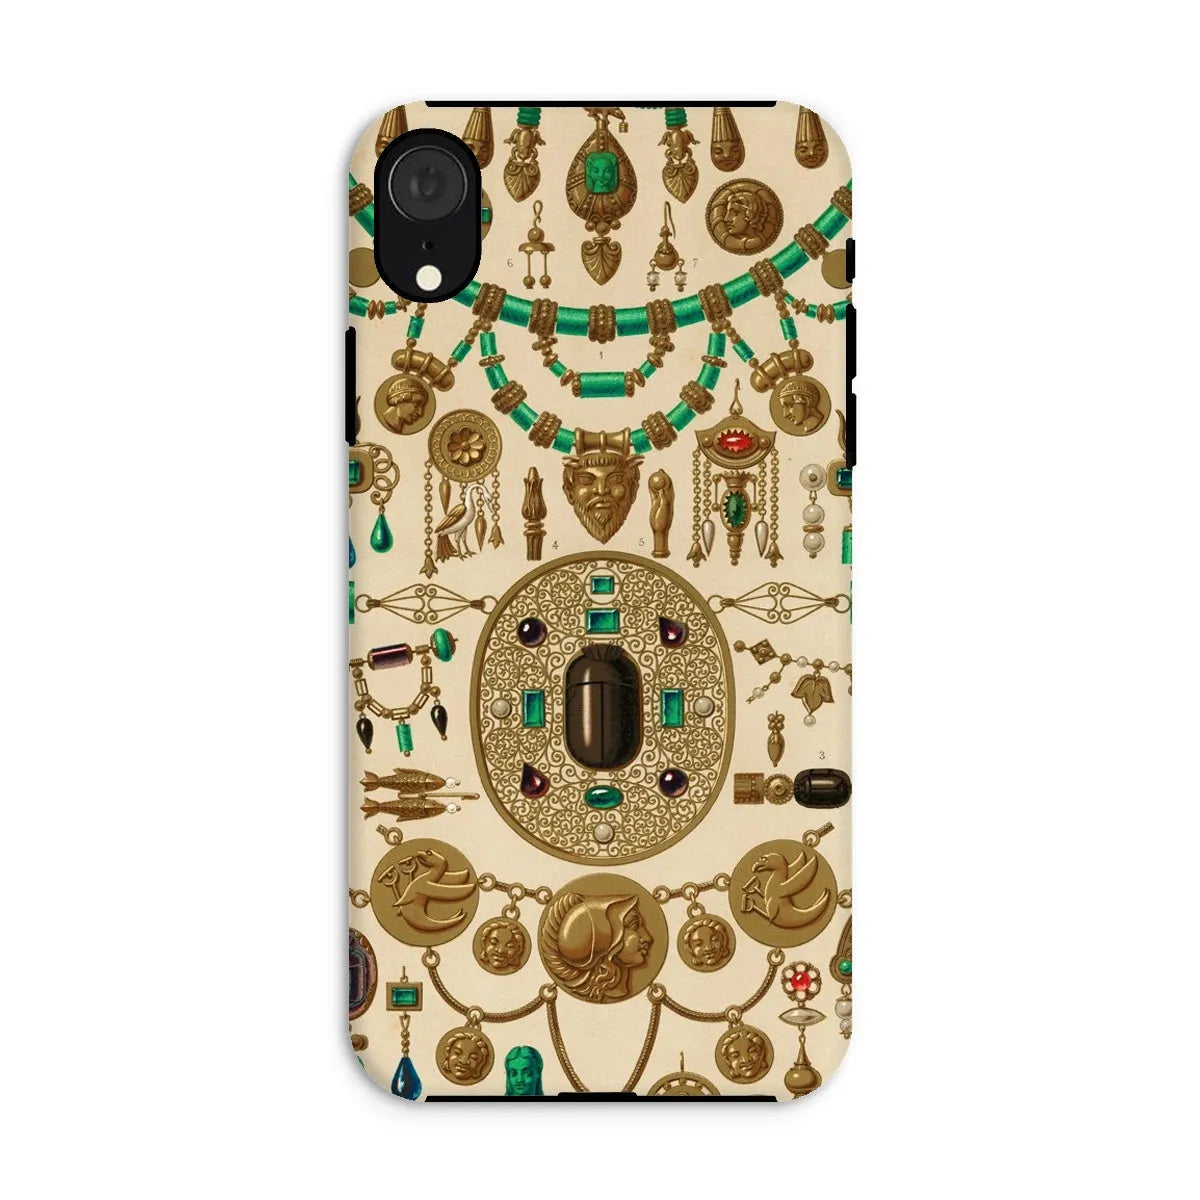 Etruscan Patterns From L’ornement Polychrome By Auguste Racinet Tough Phone Case - Iphone Xr / Matte - Mobile Phone